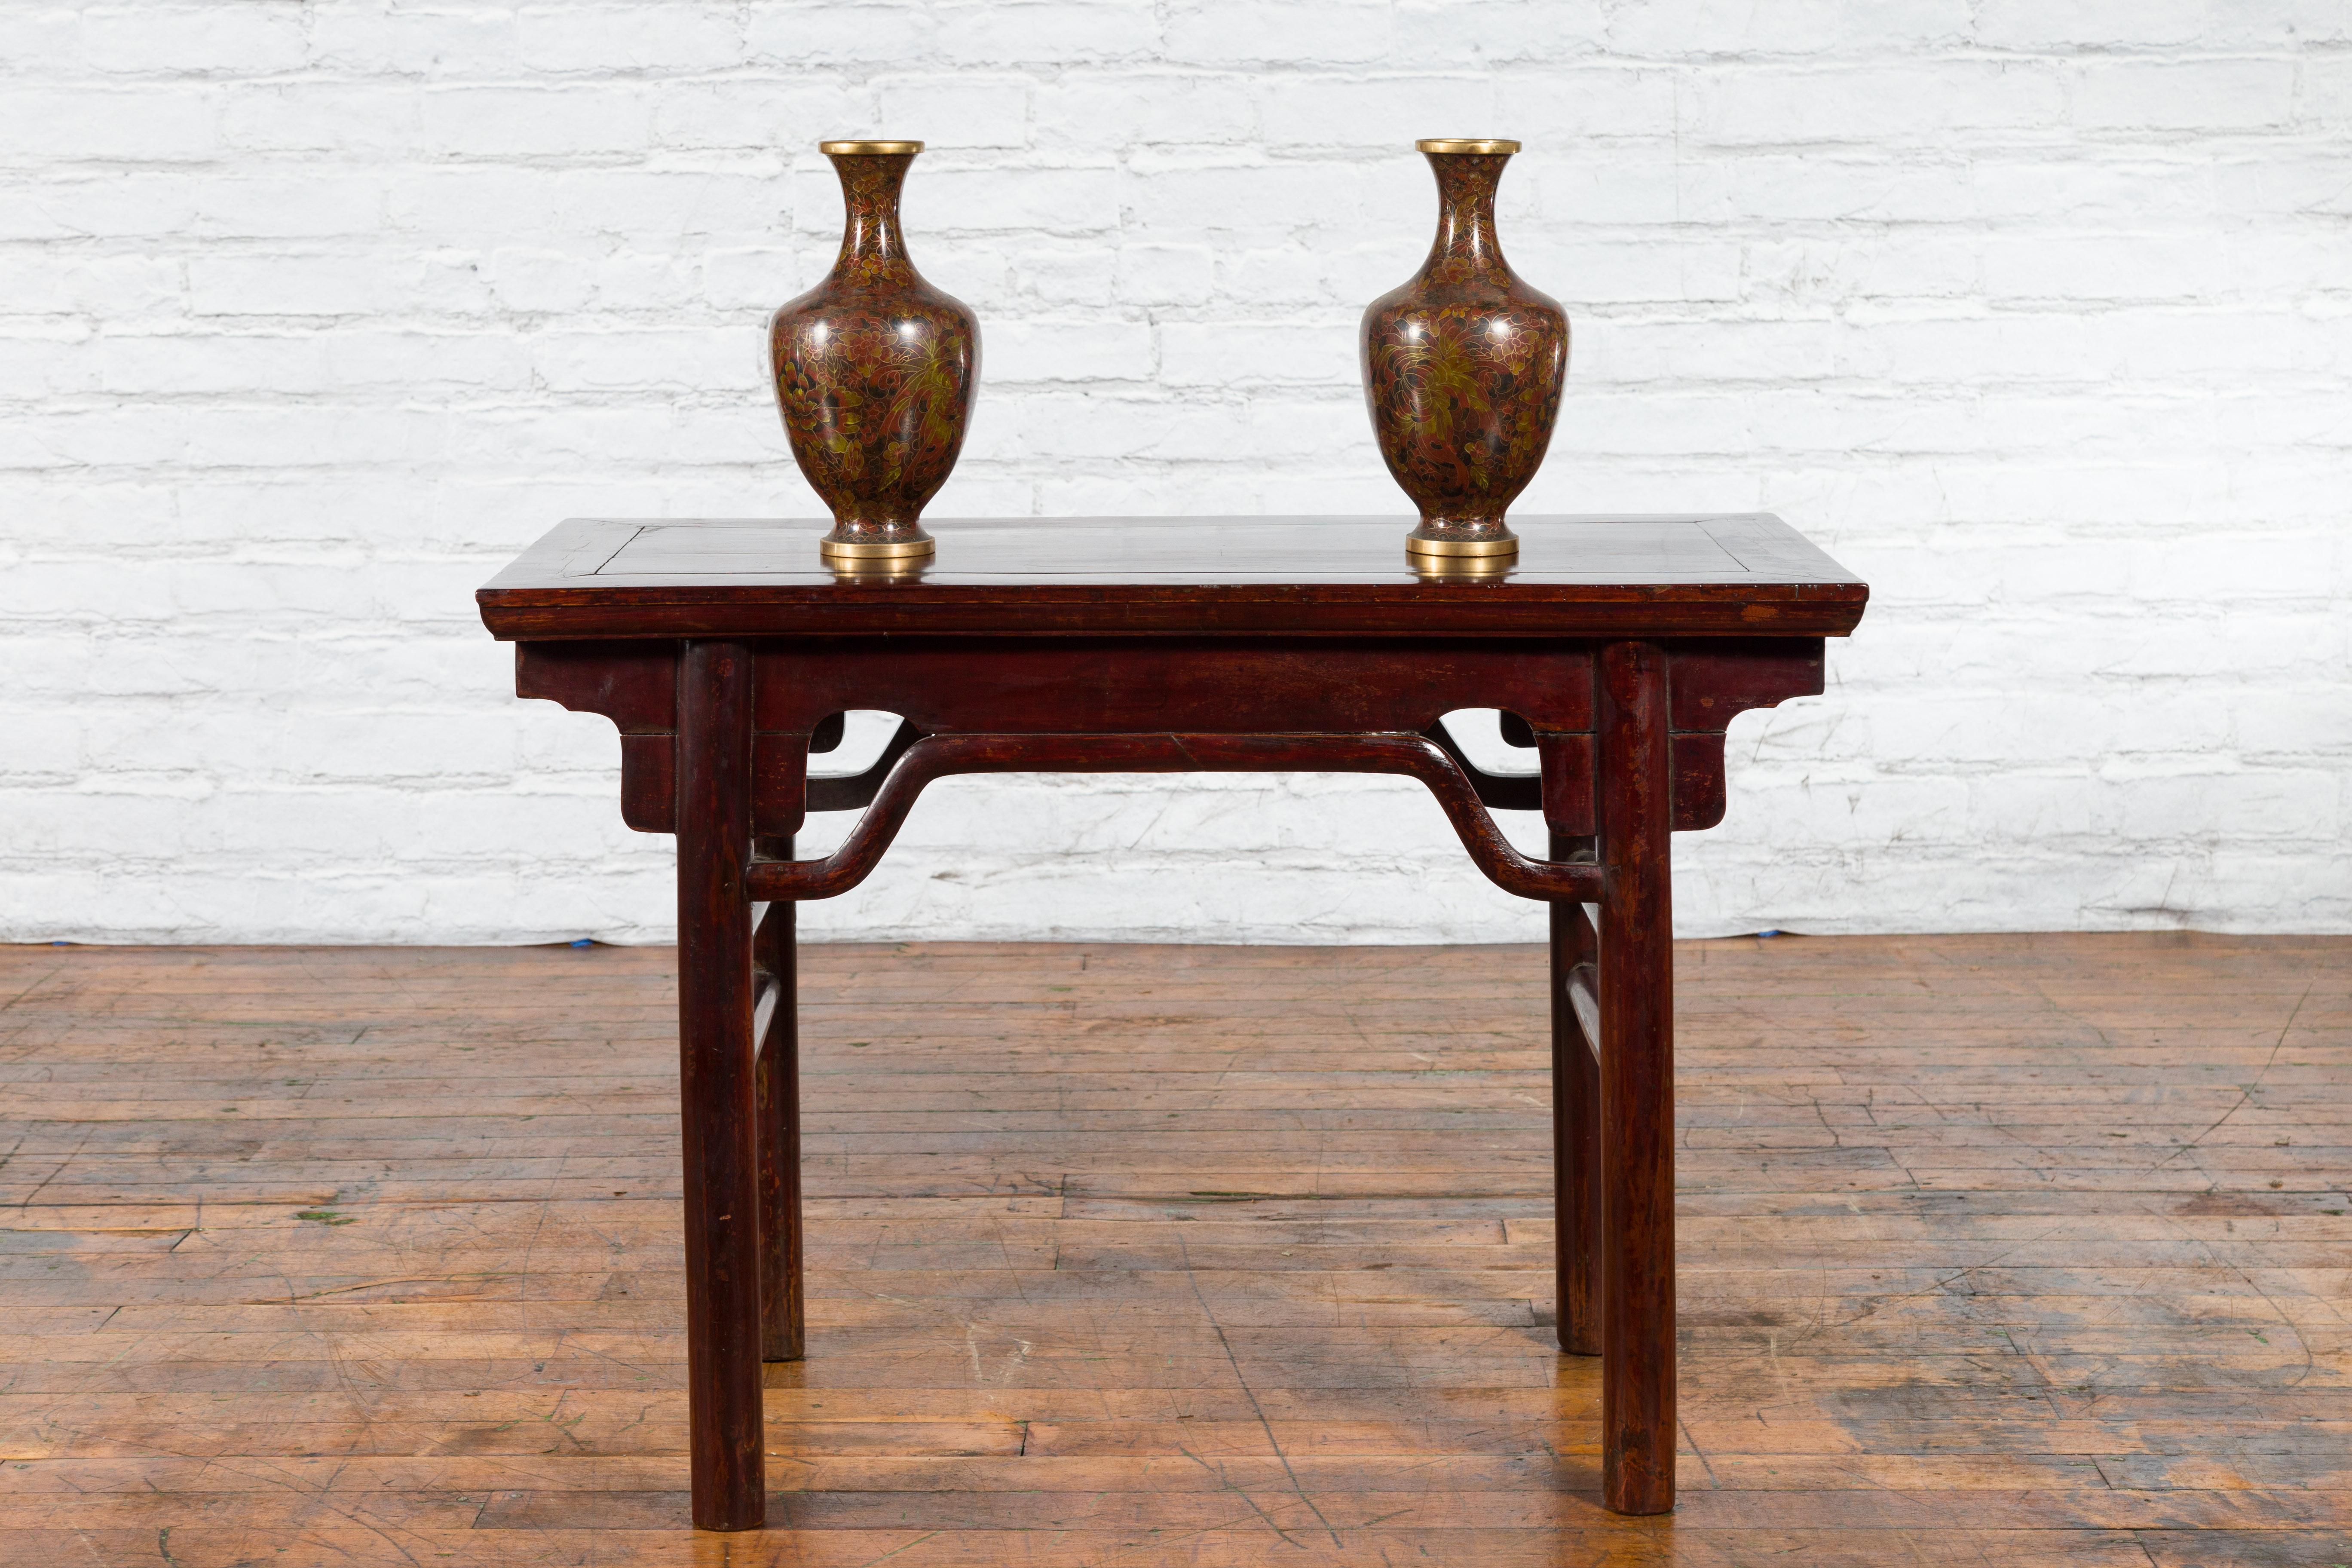 Chinese 19th Century Qing Dynasty Altar Console Table with Humpback Stretchers In Good Condition For Sale In Yonkers, NY